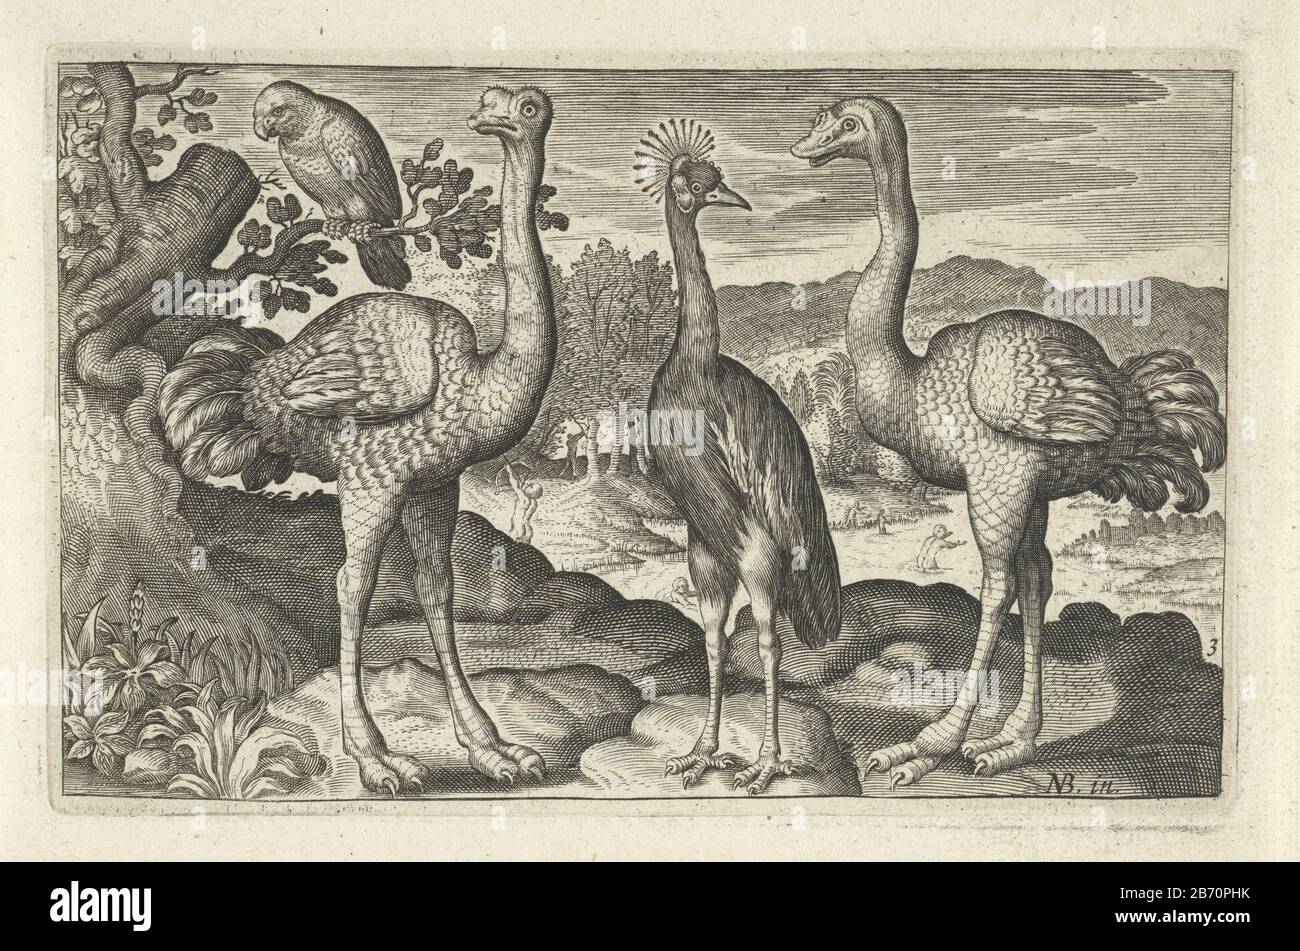 Kroonkraanvogel tussen twee struisvogels Vogels en insecten (serietitel) Crowned Crane between two ostrich birds and insects (series title) Property Type: picture Item number: RP-P-1878-A-710Catalogusreferentie: Hollstein Dutch 226-copyOrn Cat I 37 B.3 Inscriptions / Brands: collector's mark, verso under , stamped: Lugt 2228 Manufacturer : to print from: Nicolaes de Bruyn (listed building) printmaker: anonymous publisher Claes Jansz. Visscher (II) Date: 1594 - 1644 Physical characteristics: engra material: paper Technique: engra (printing process) Measurements: plate edge: h 81 mm × W 126 mmTo Stock Photo